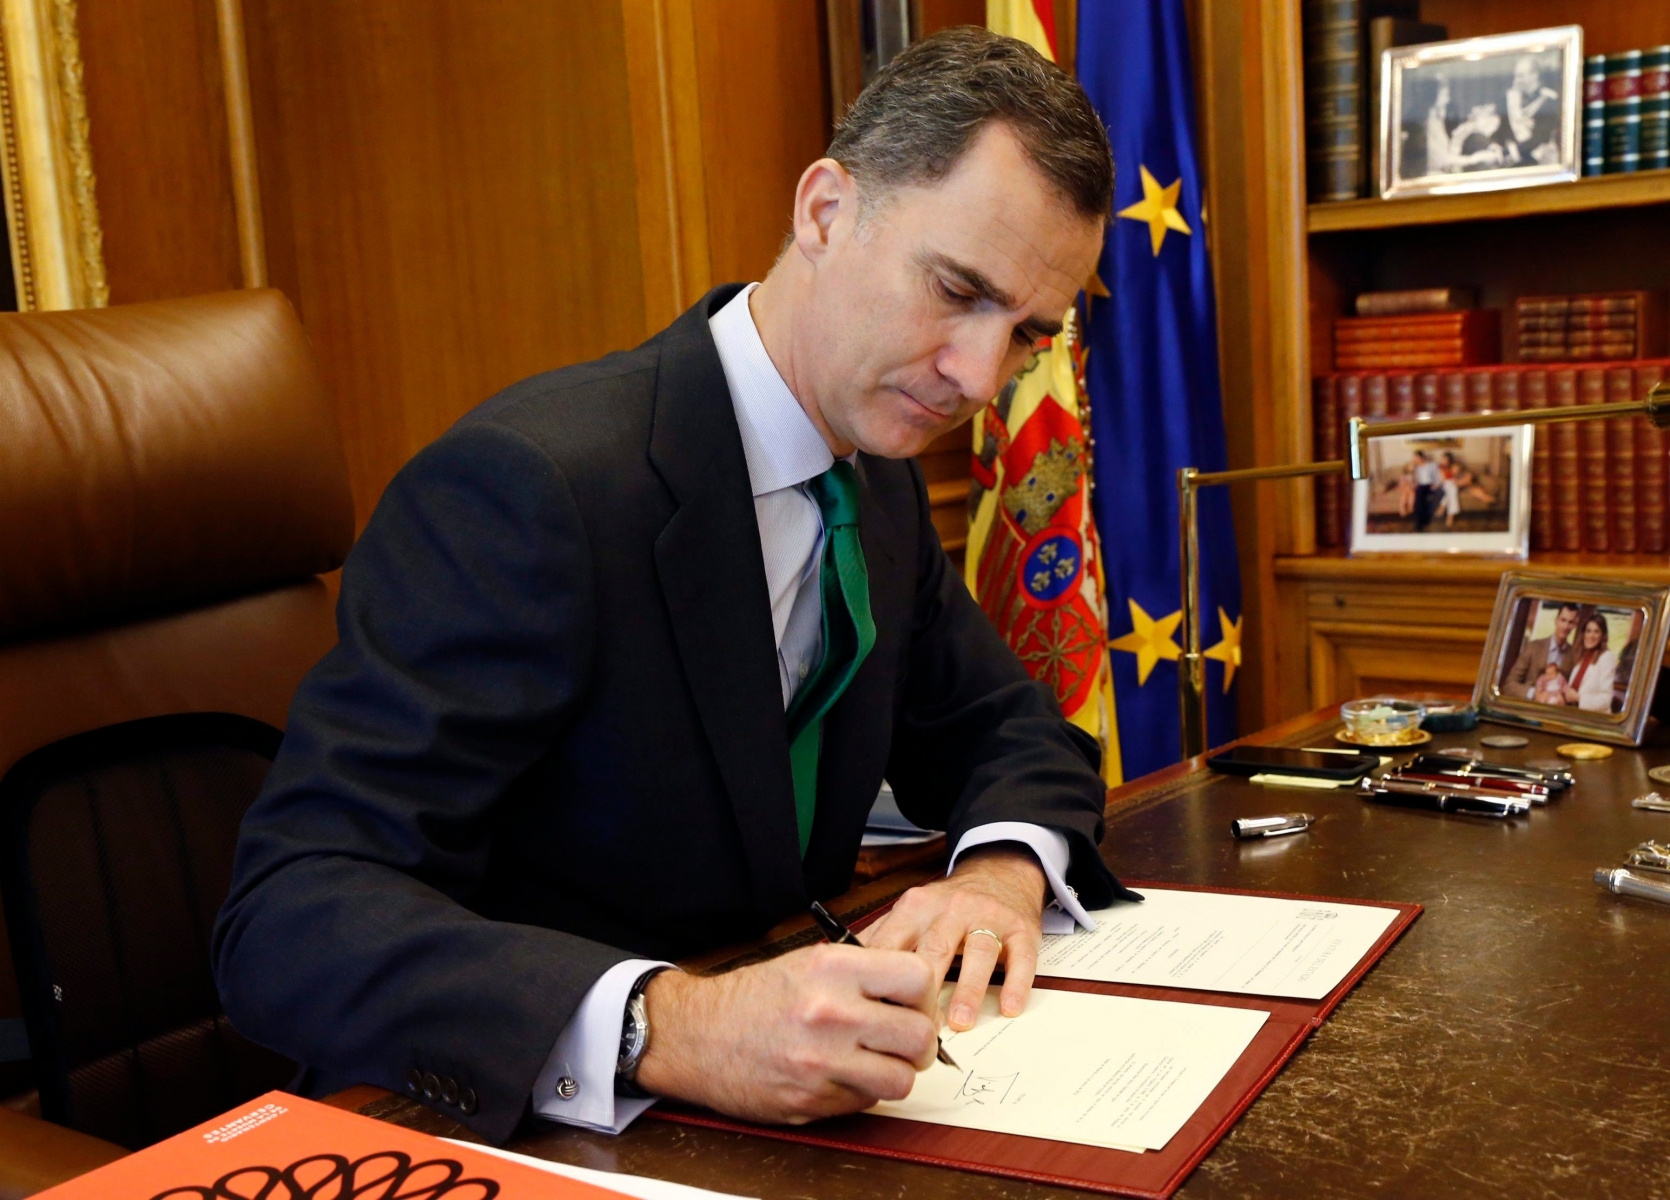 epa05287959 A handout photo released by Spanish Royal Household of Spain's King Felipe VI (L) signing the royal decree for dissolution of the Chambers of Spanish Parliament and the date for new general election, set for 26 June, during a meeting with the Speaker of the Lower House of Spanish Parliament, Patxi Lopez (not pictured), at king's office in La Zarzuela Palace, in Madrid, Spain, 03 May 2016. The current legislature has been the shortest one of the current Spanish democratic era, it began on 13 January after the lastest general election held on 20 December 2015. The election were called after the Spanish parties would not have managed to reach an agreement to form a government.  EPA/SPANISH ROYAL HOUSEHOLD / HANDOUT  HANDOUT EDITORIAL USE ONLY/NO SALES SPAIN GOVERNMENT PARLIAMENT DISSOLUTION